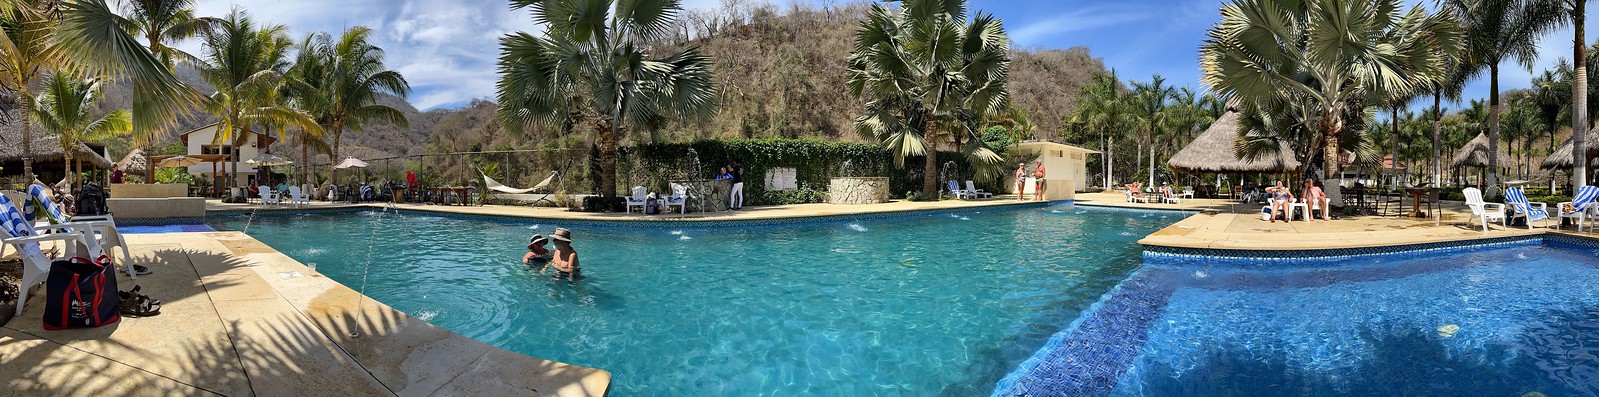 Panorama of the pool area